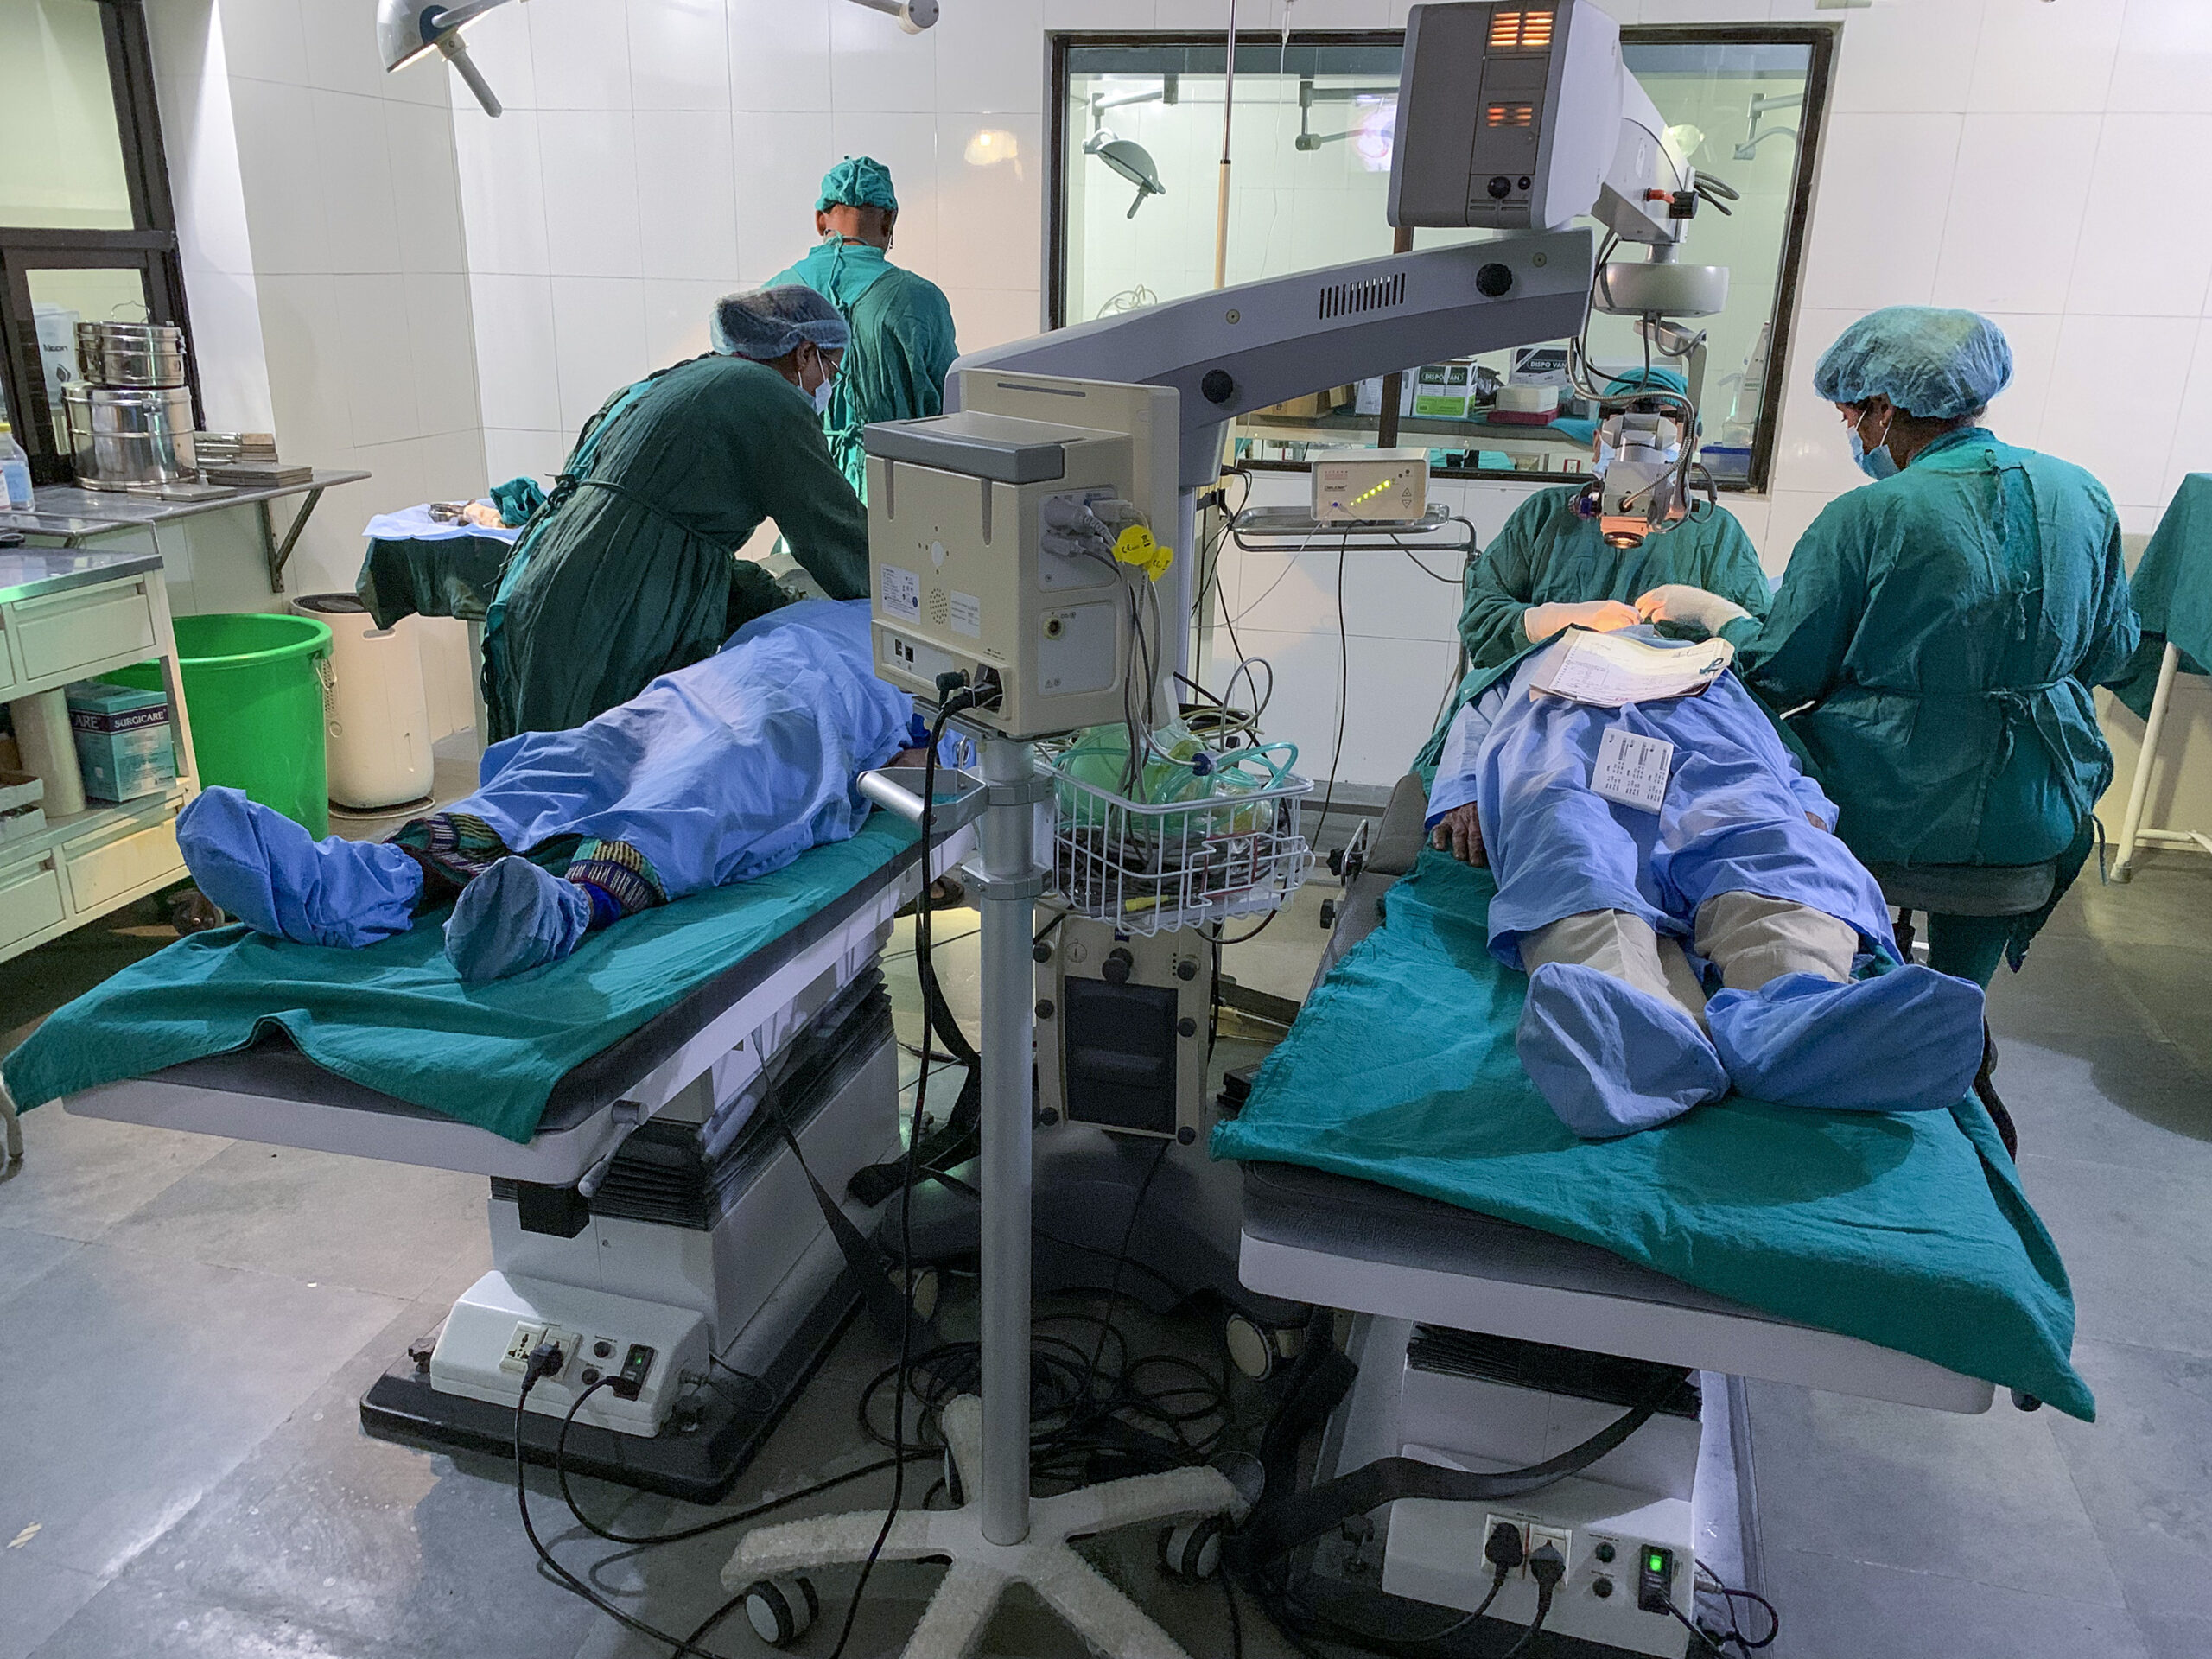 The patient on the left is being prepared for surgery while the surgeon is busy with the patient on the right, Nepal.